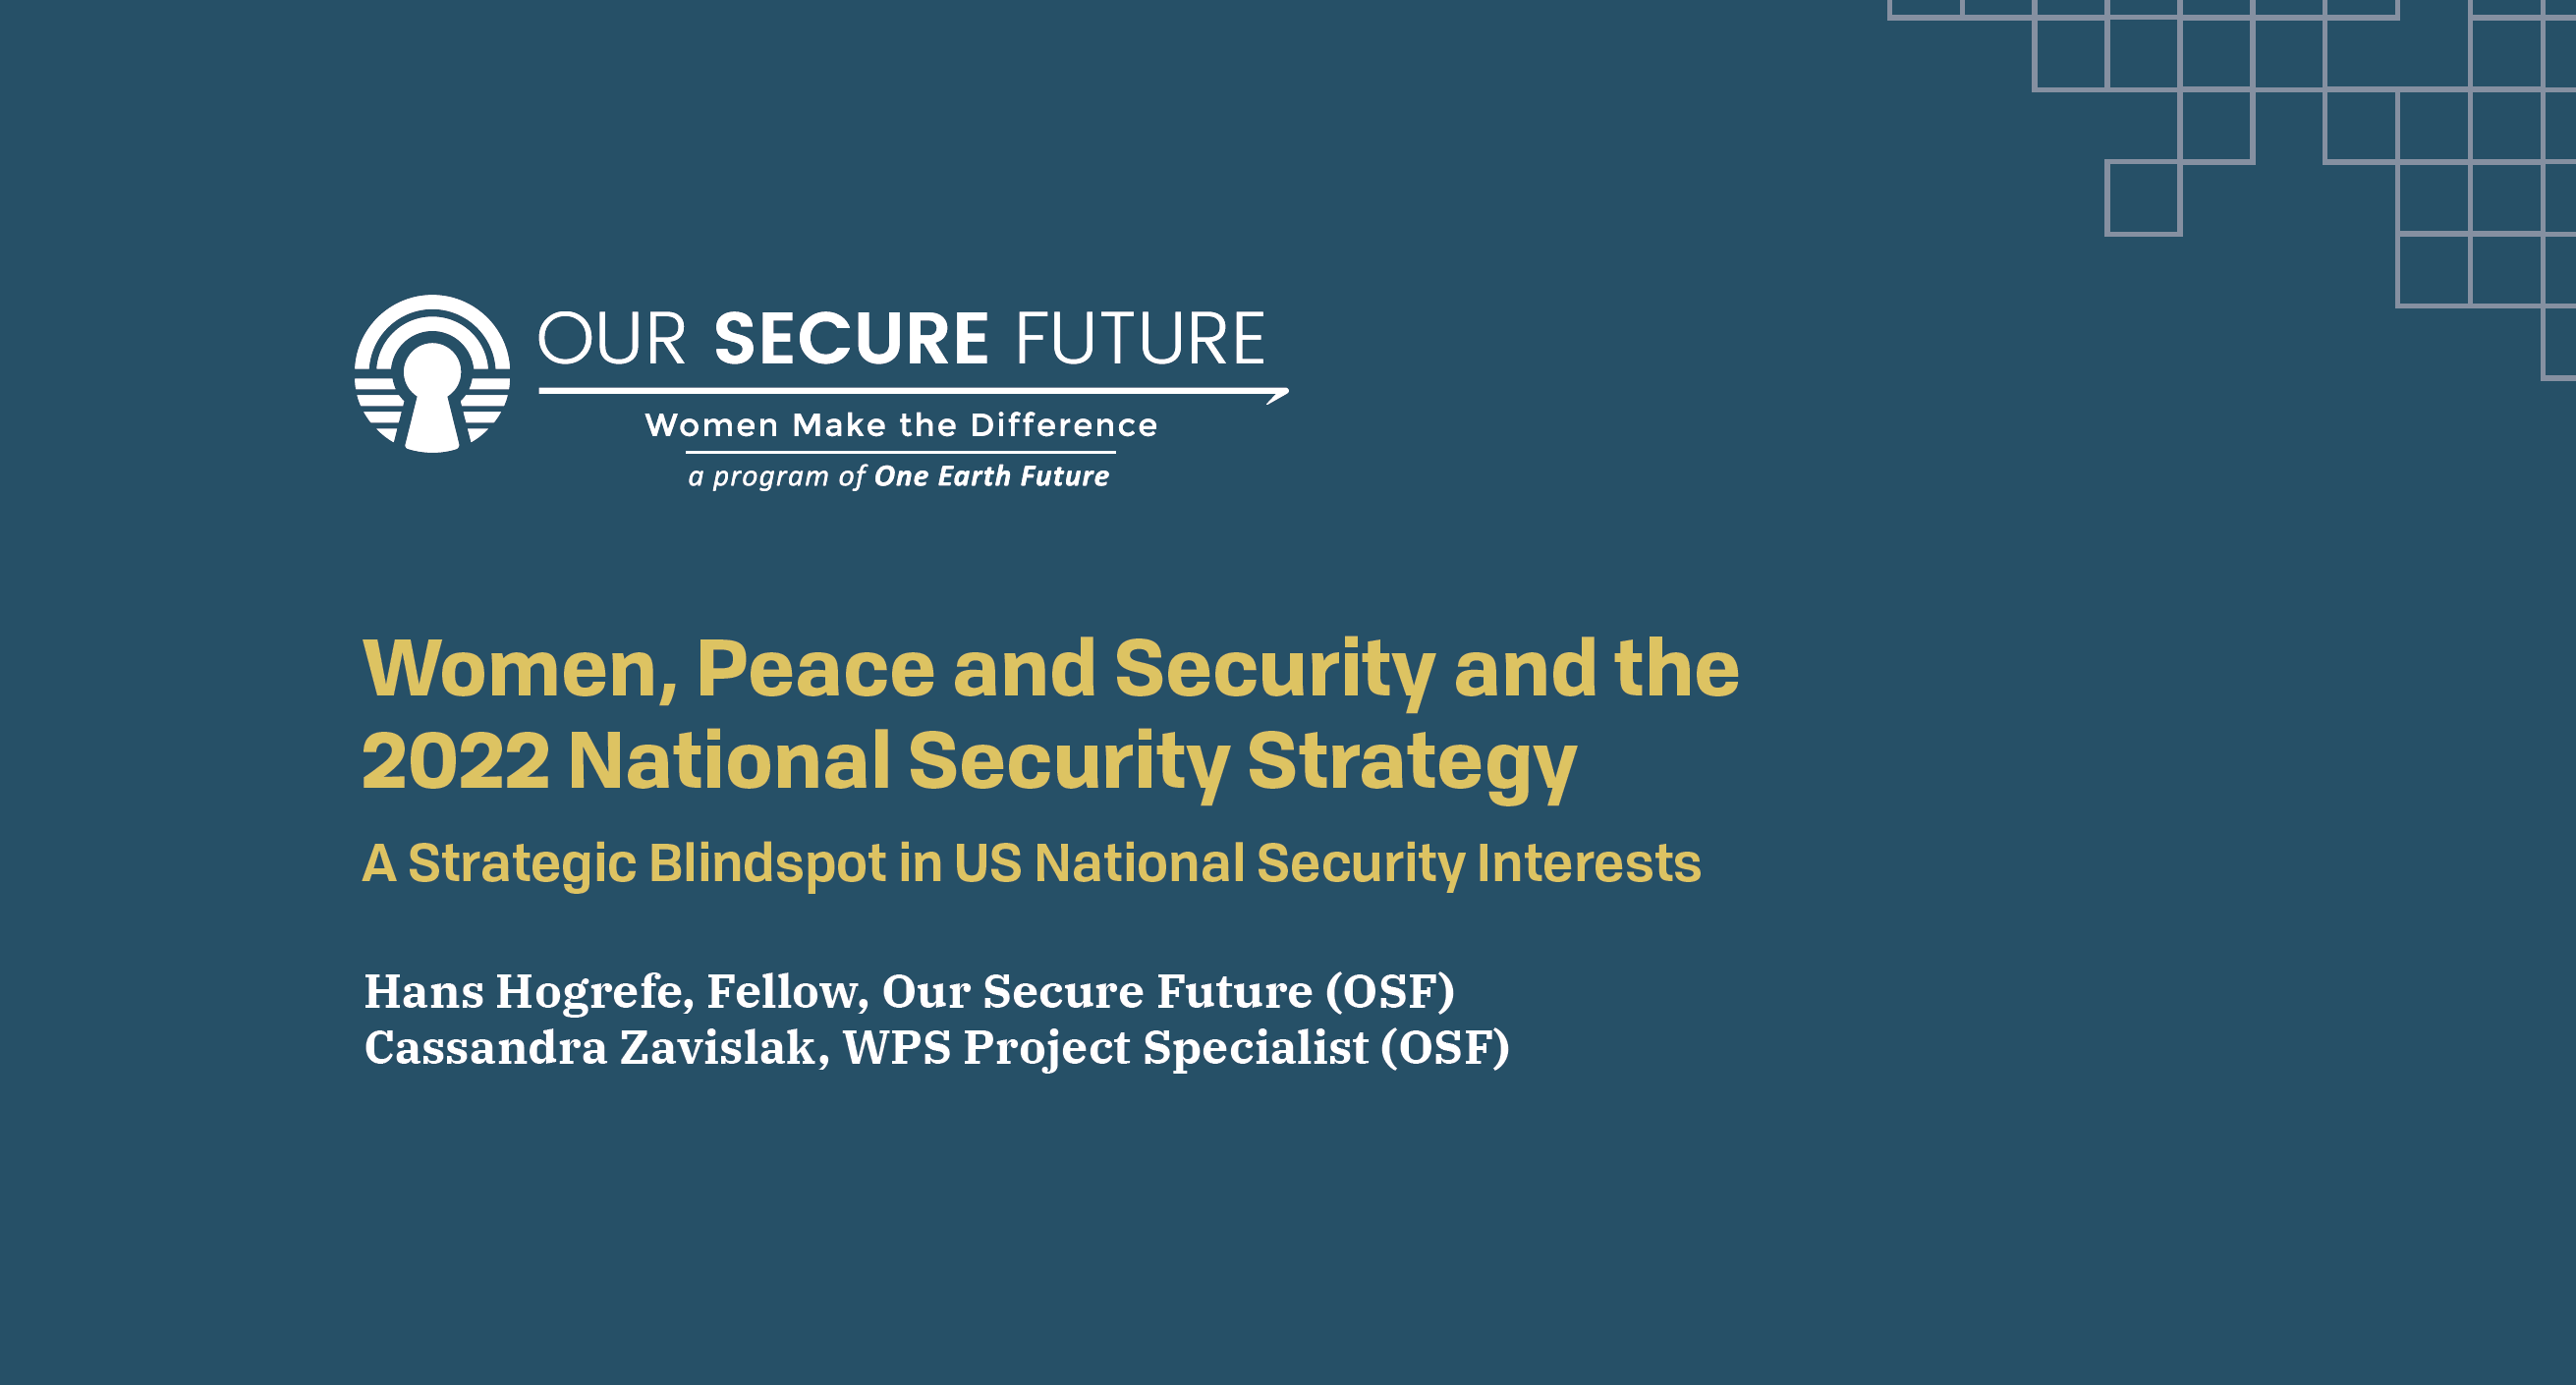 Women, Peace and Security and the 2022 National Security Strategy Our